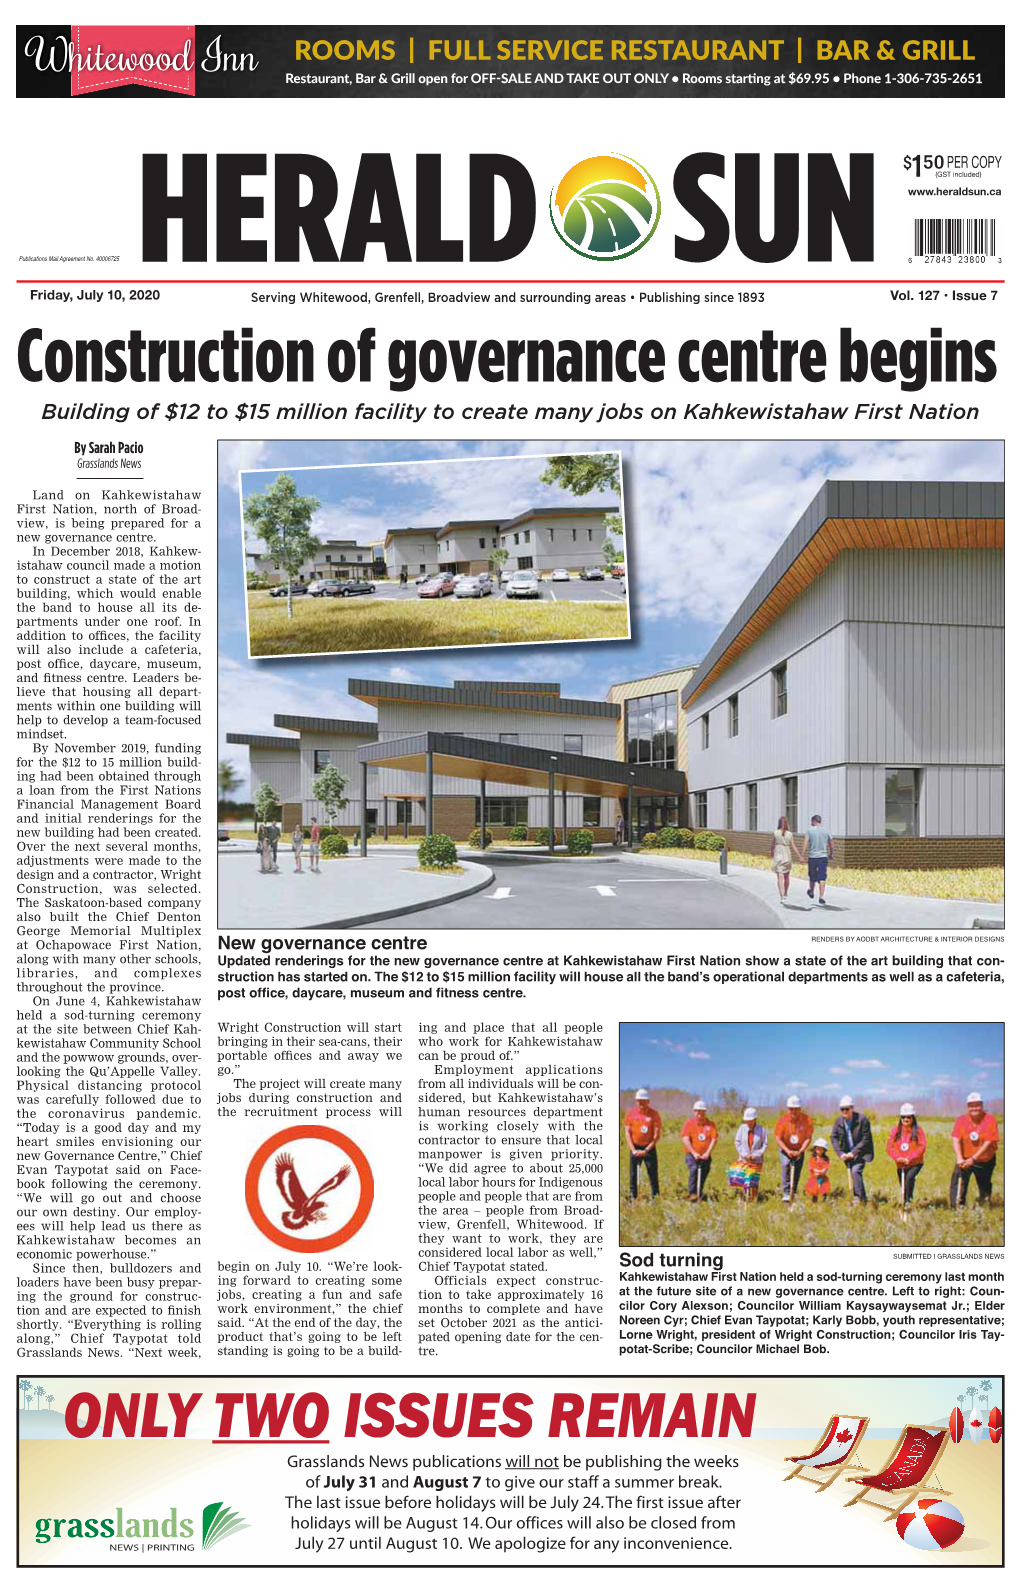 Construction of Governance Centre Begins Building of $12 to $15 Million Facility to Create Many Jobs on Kahkewistahaw First Nation